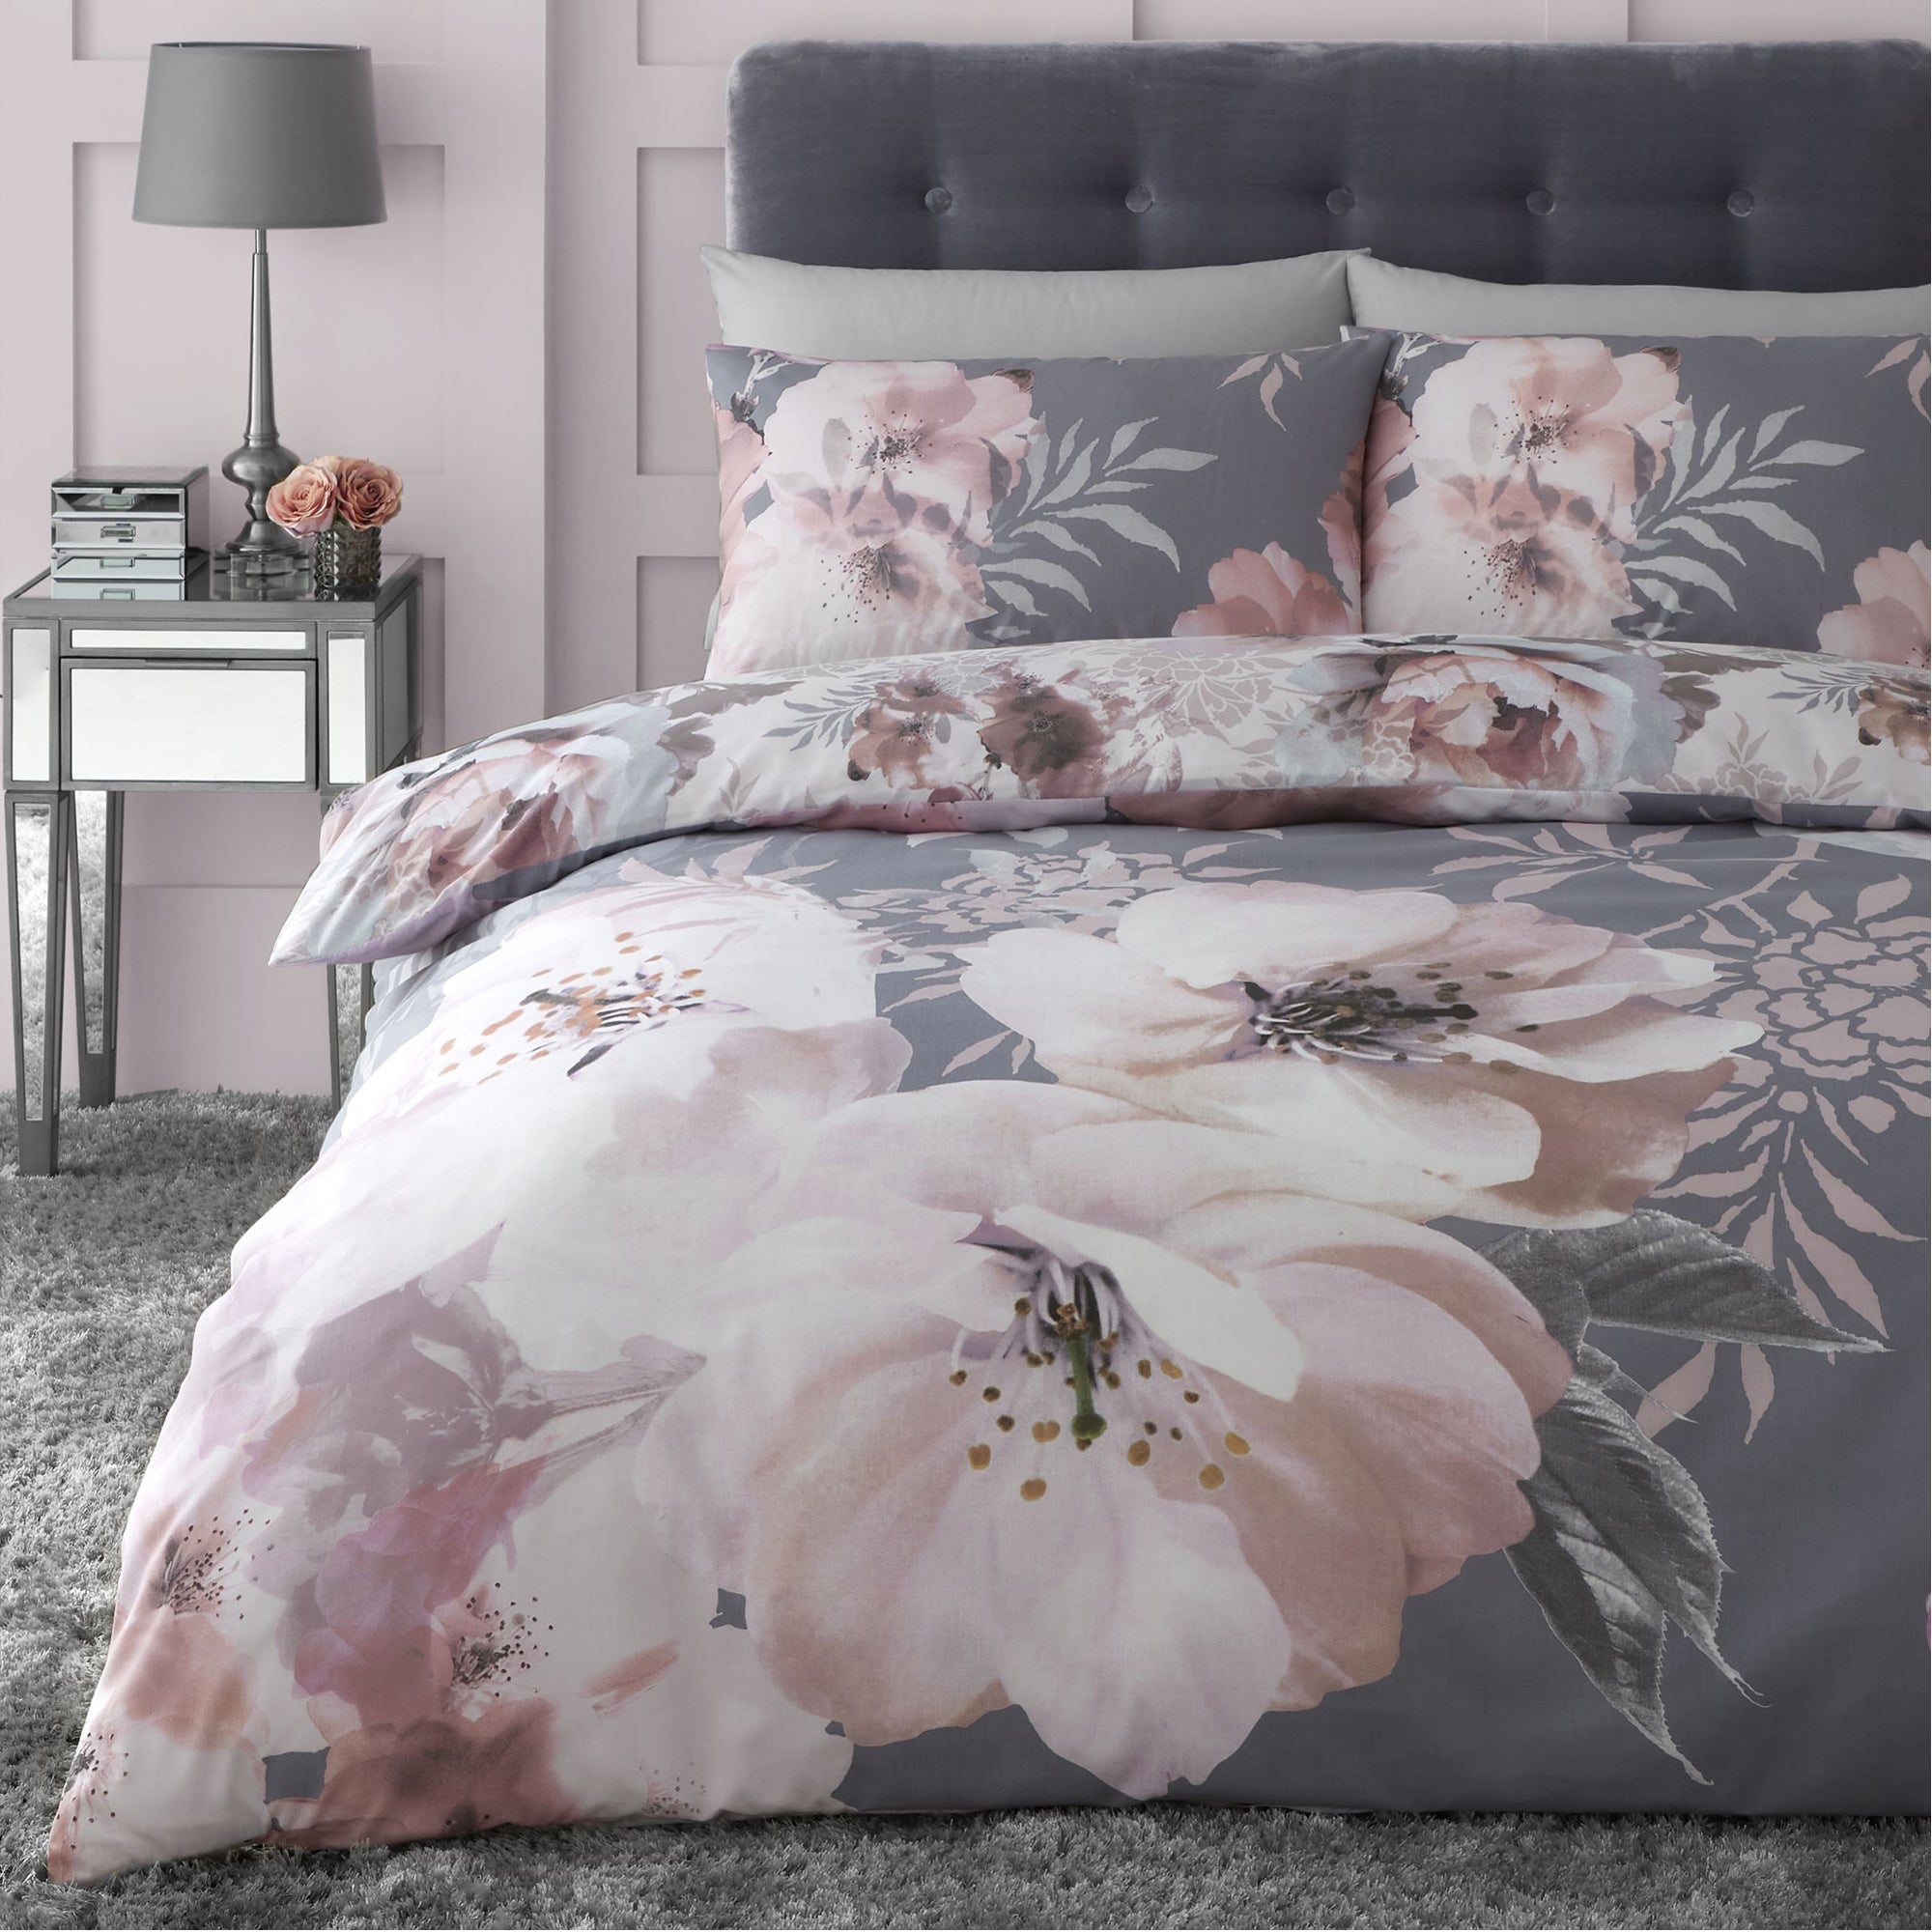 Polyester, Catherine lansfield, Duvet covers, Bedding